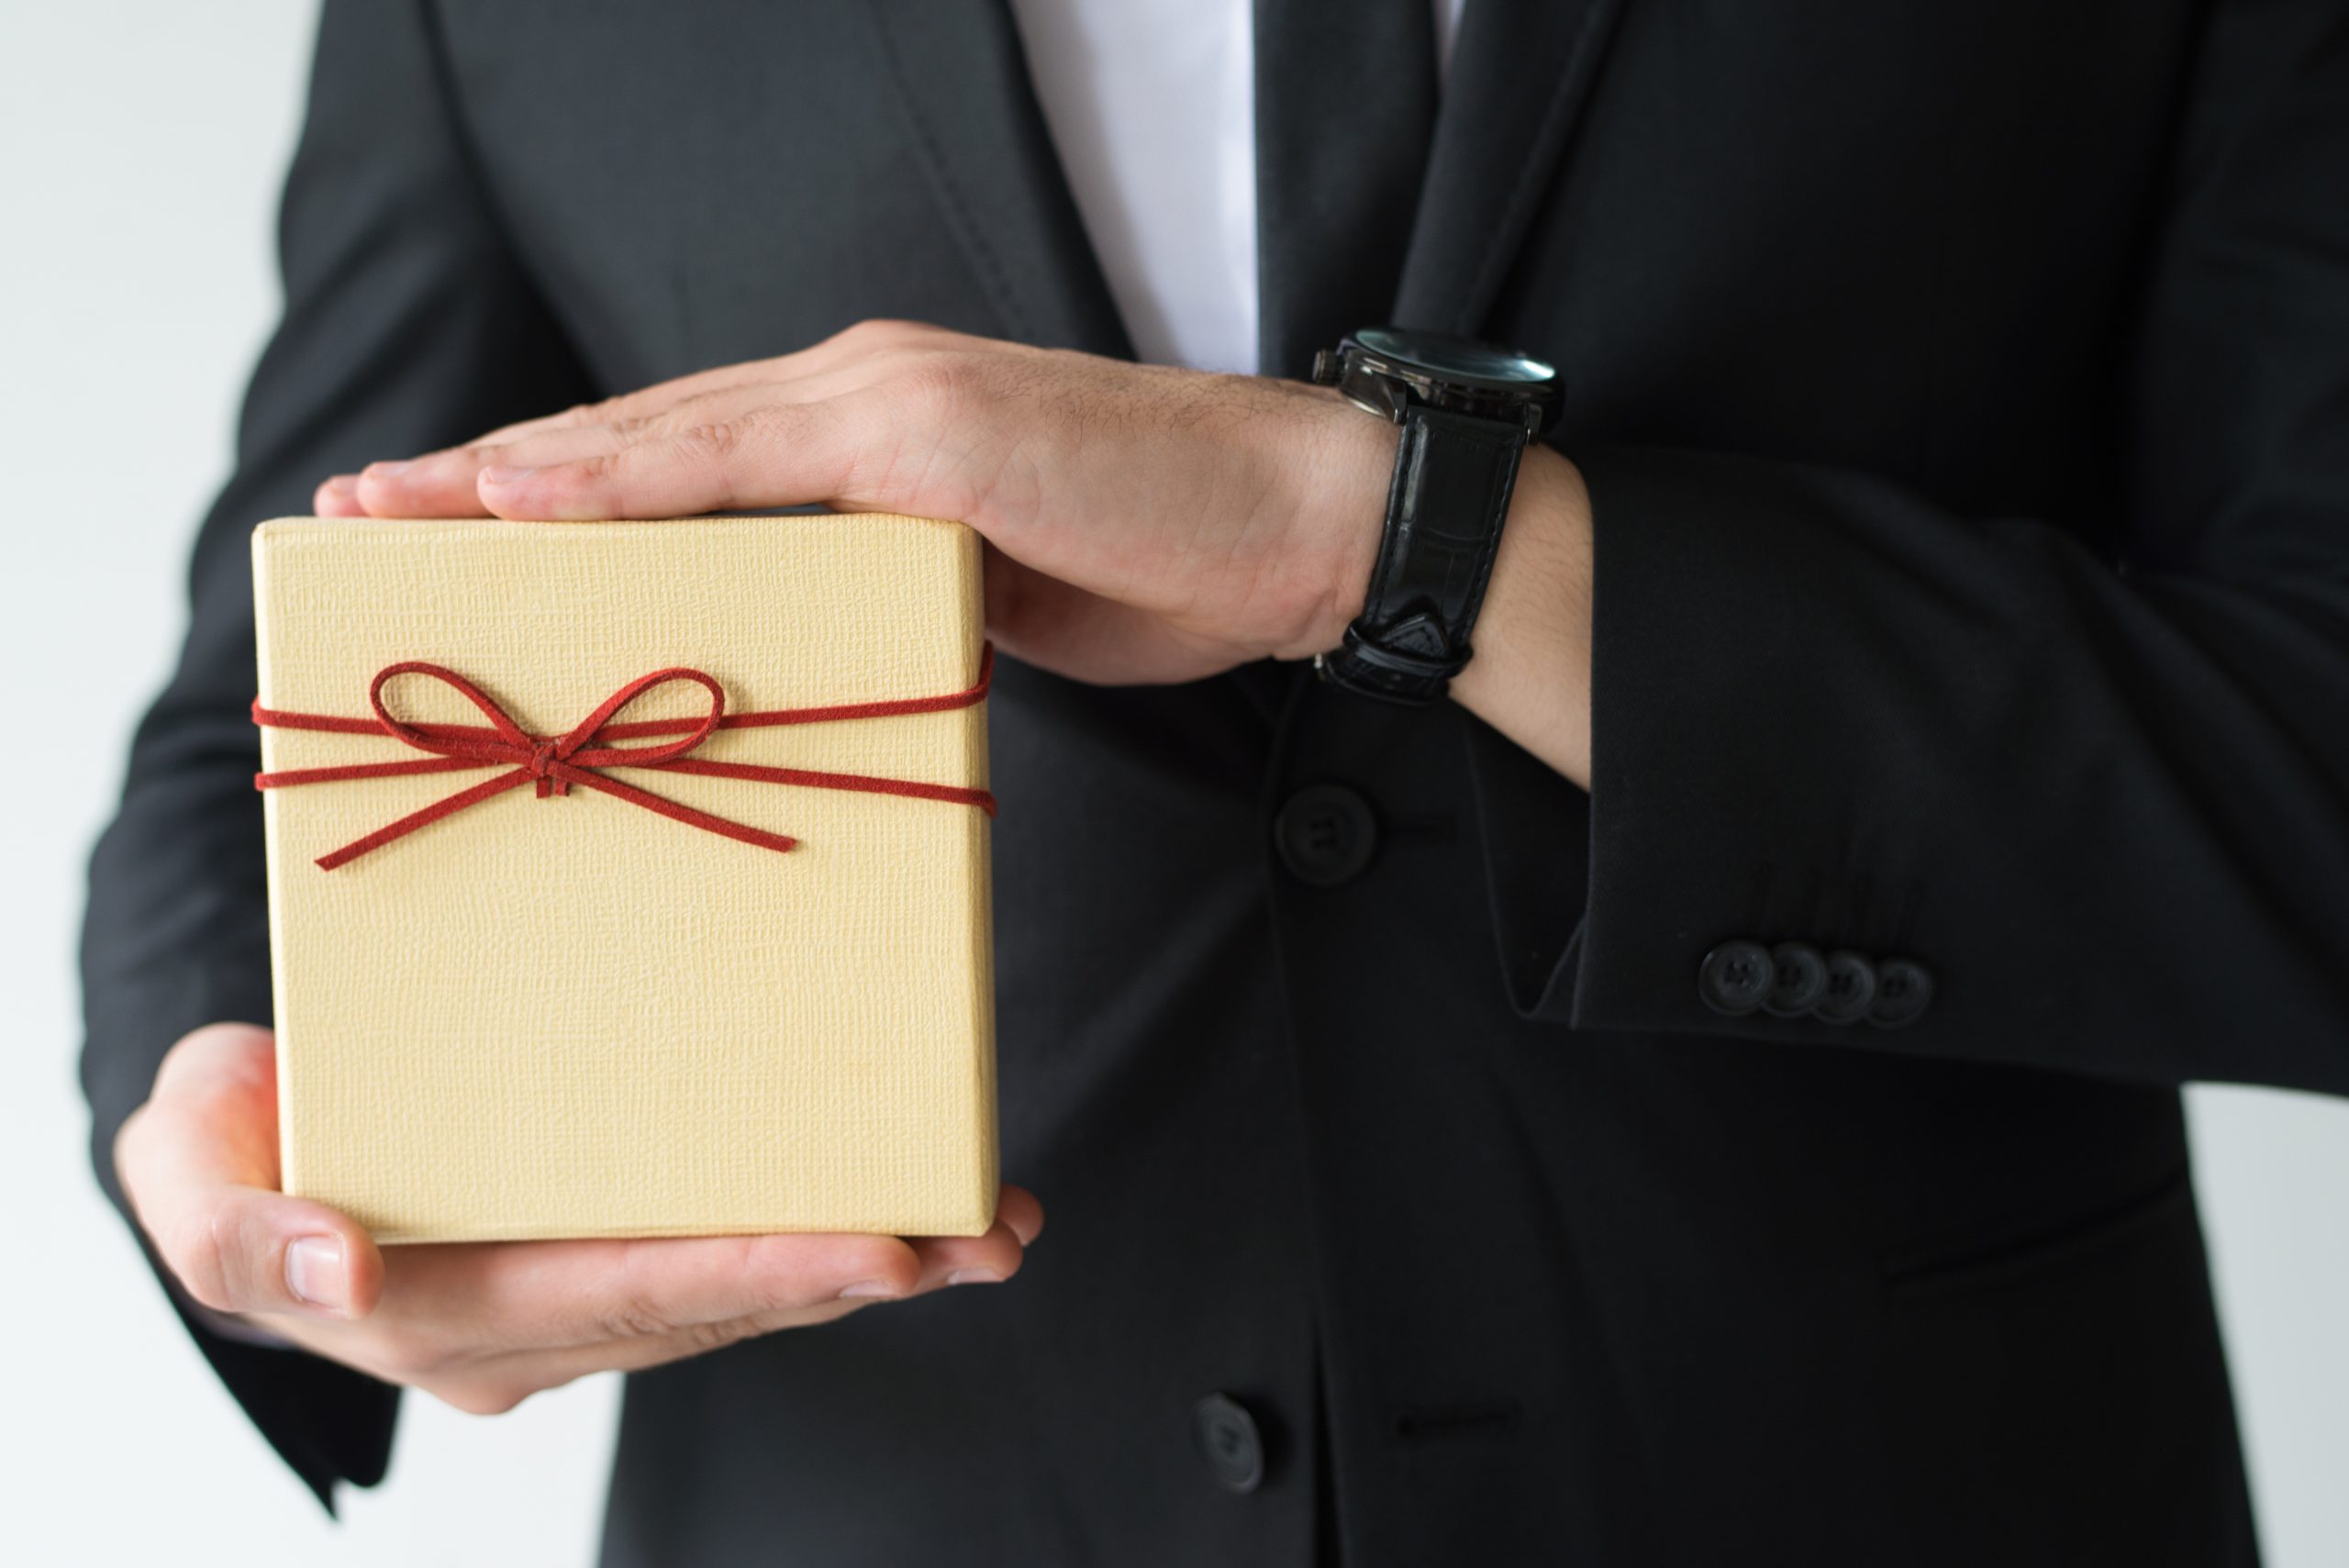 Creating Corporate Gift Boxes: Unique Ideas to Celebrate Your Company’s Anniversary